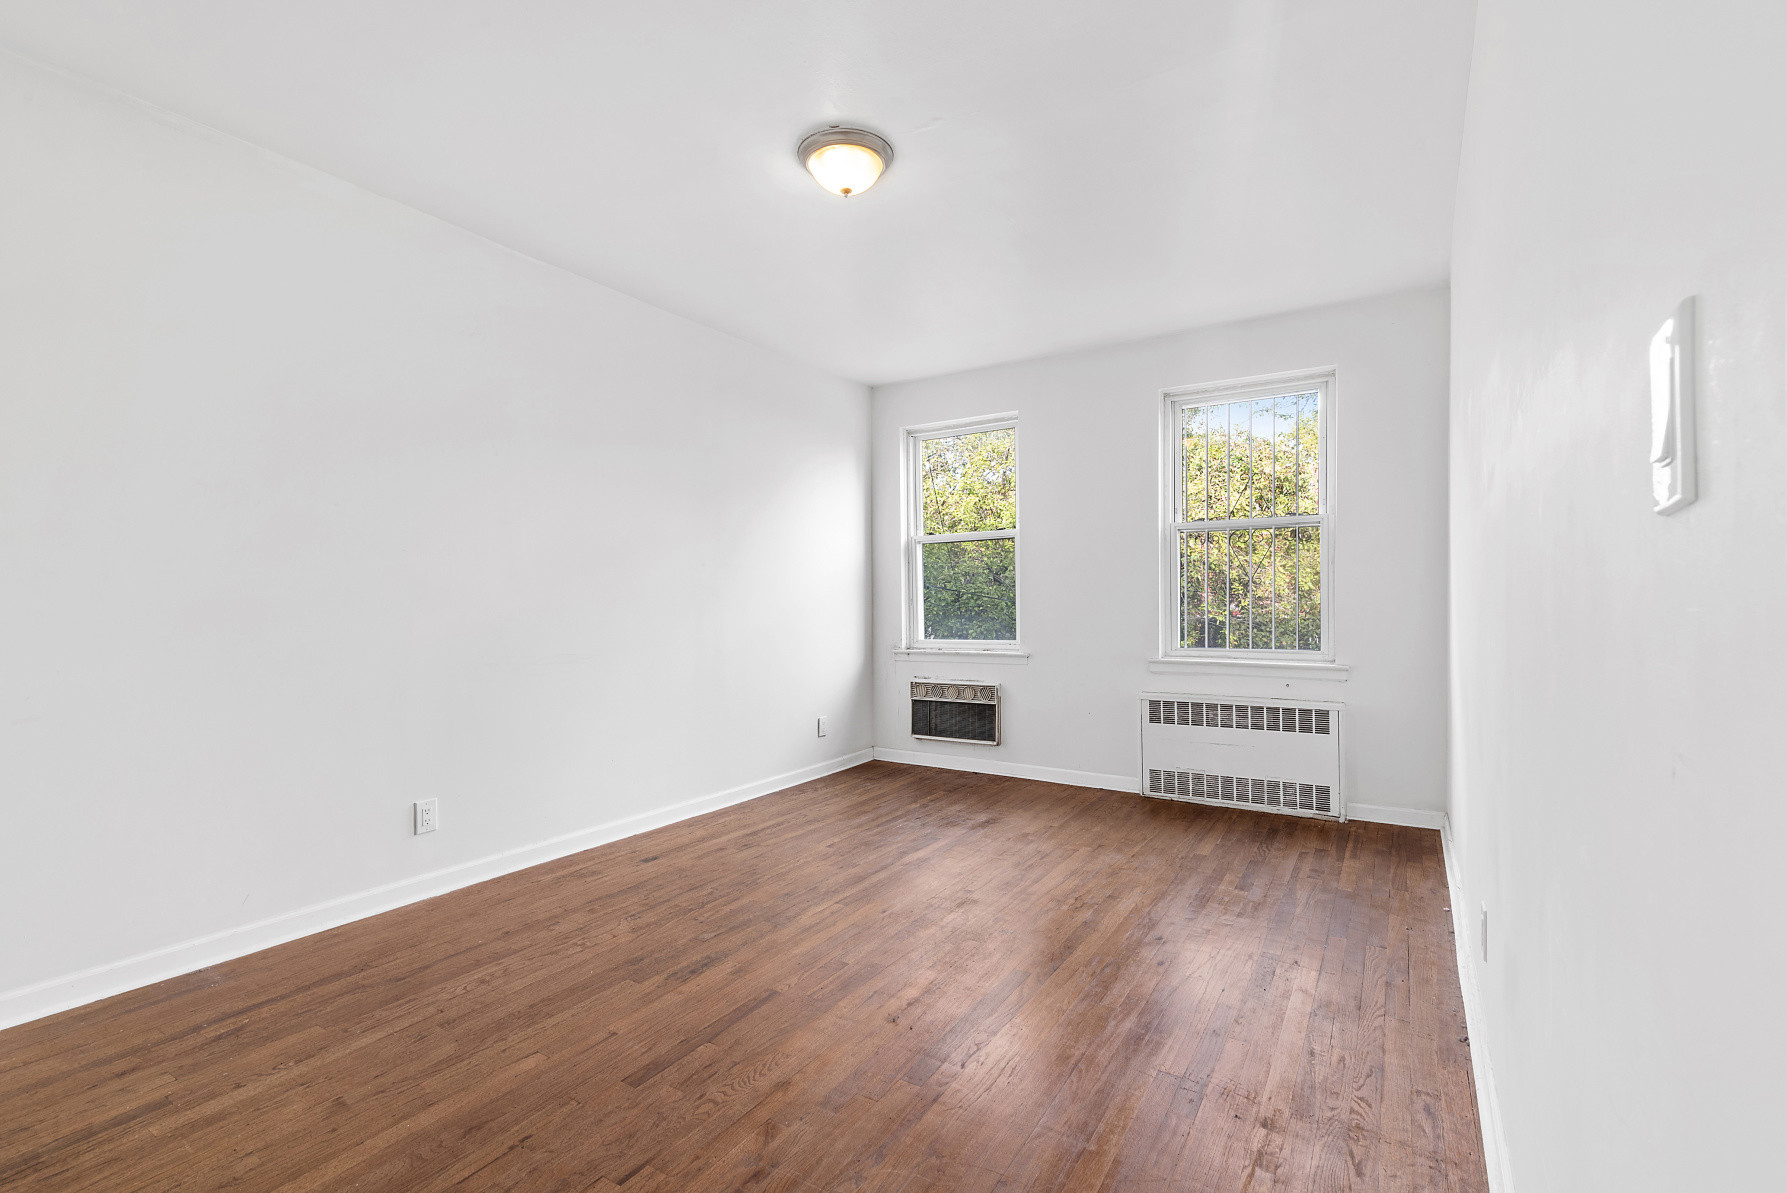 hardwood floor installation buffalo ny of laquana mcneil real estate agent in new york city compass within 986b78a75b725095ac693dbfe6abc63c49abdc3e